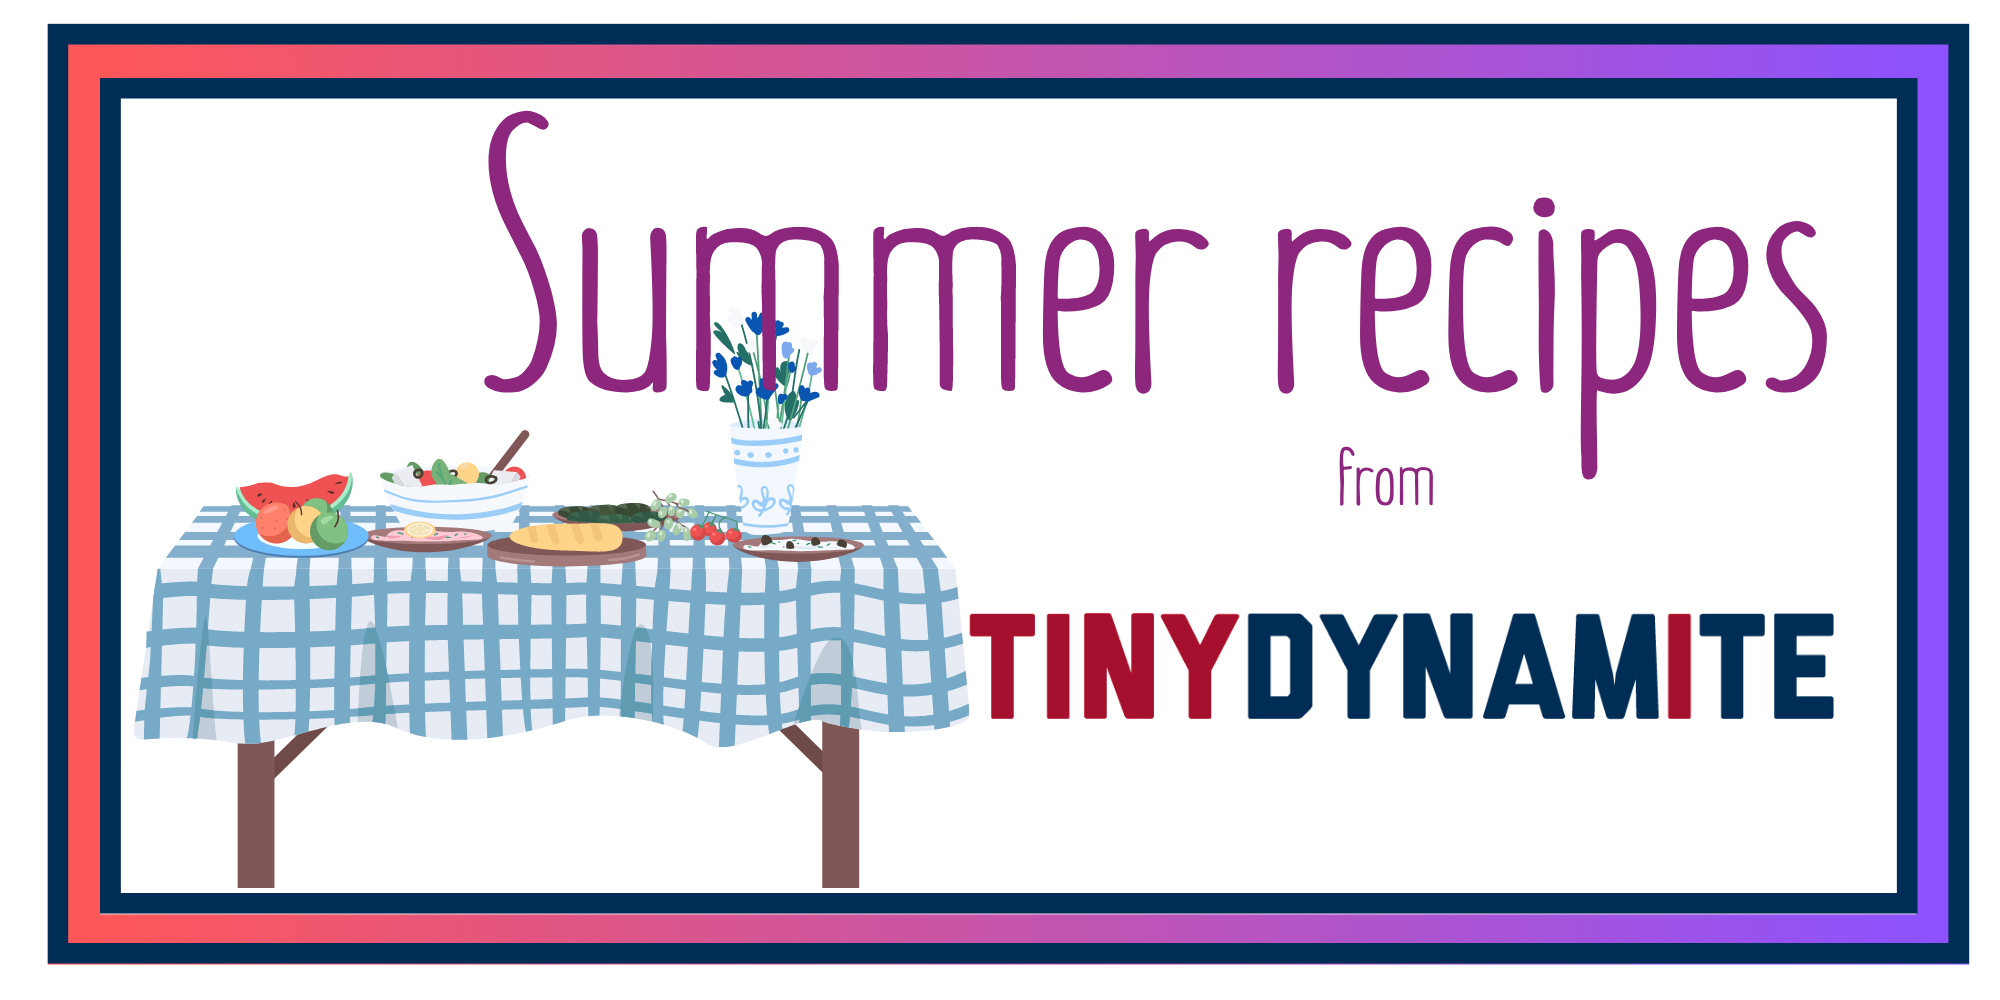 A picnic table with a summer spread, and the words "Summer Recipes from Tiny Dynamite"